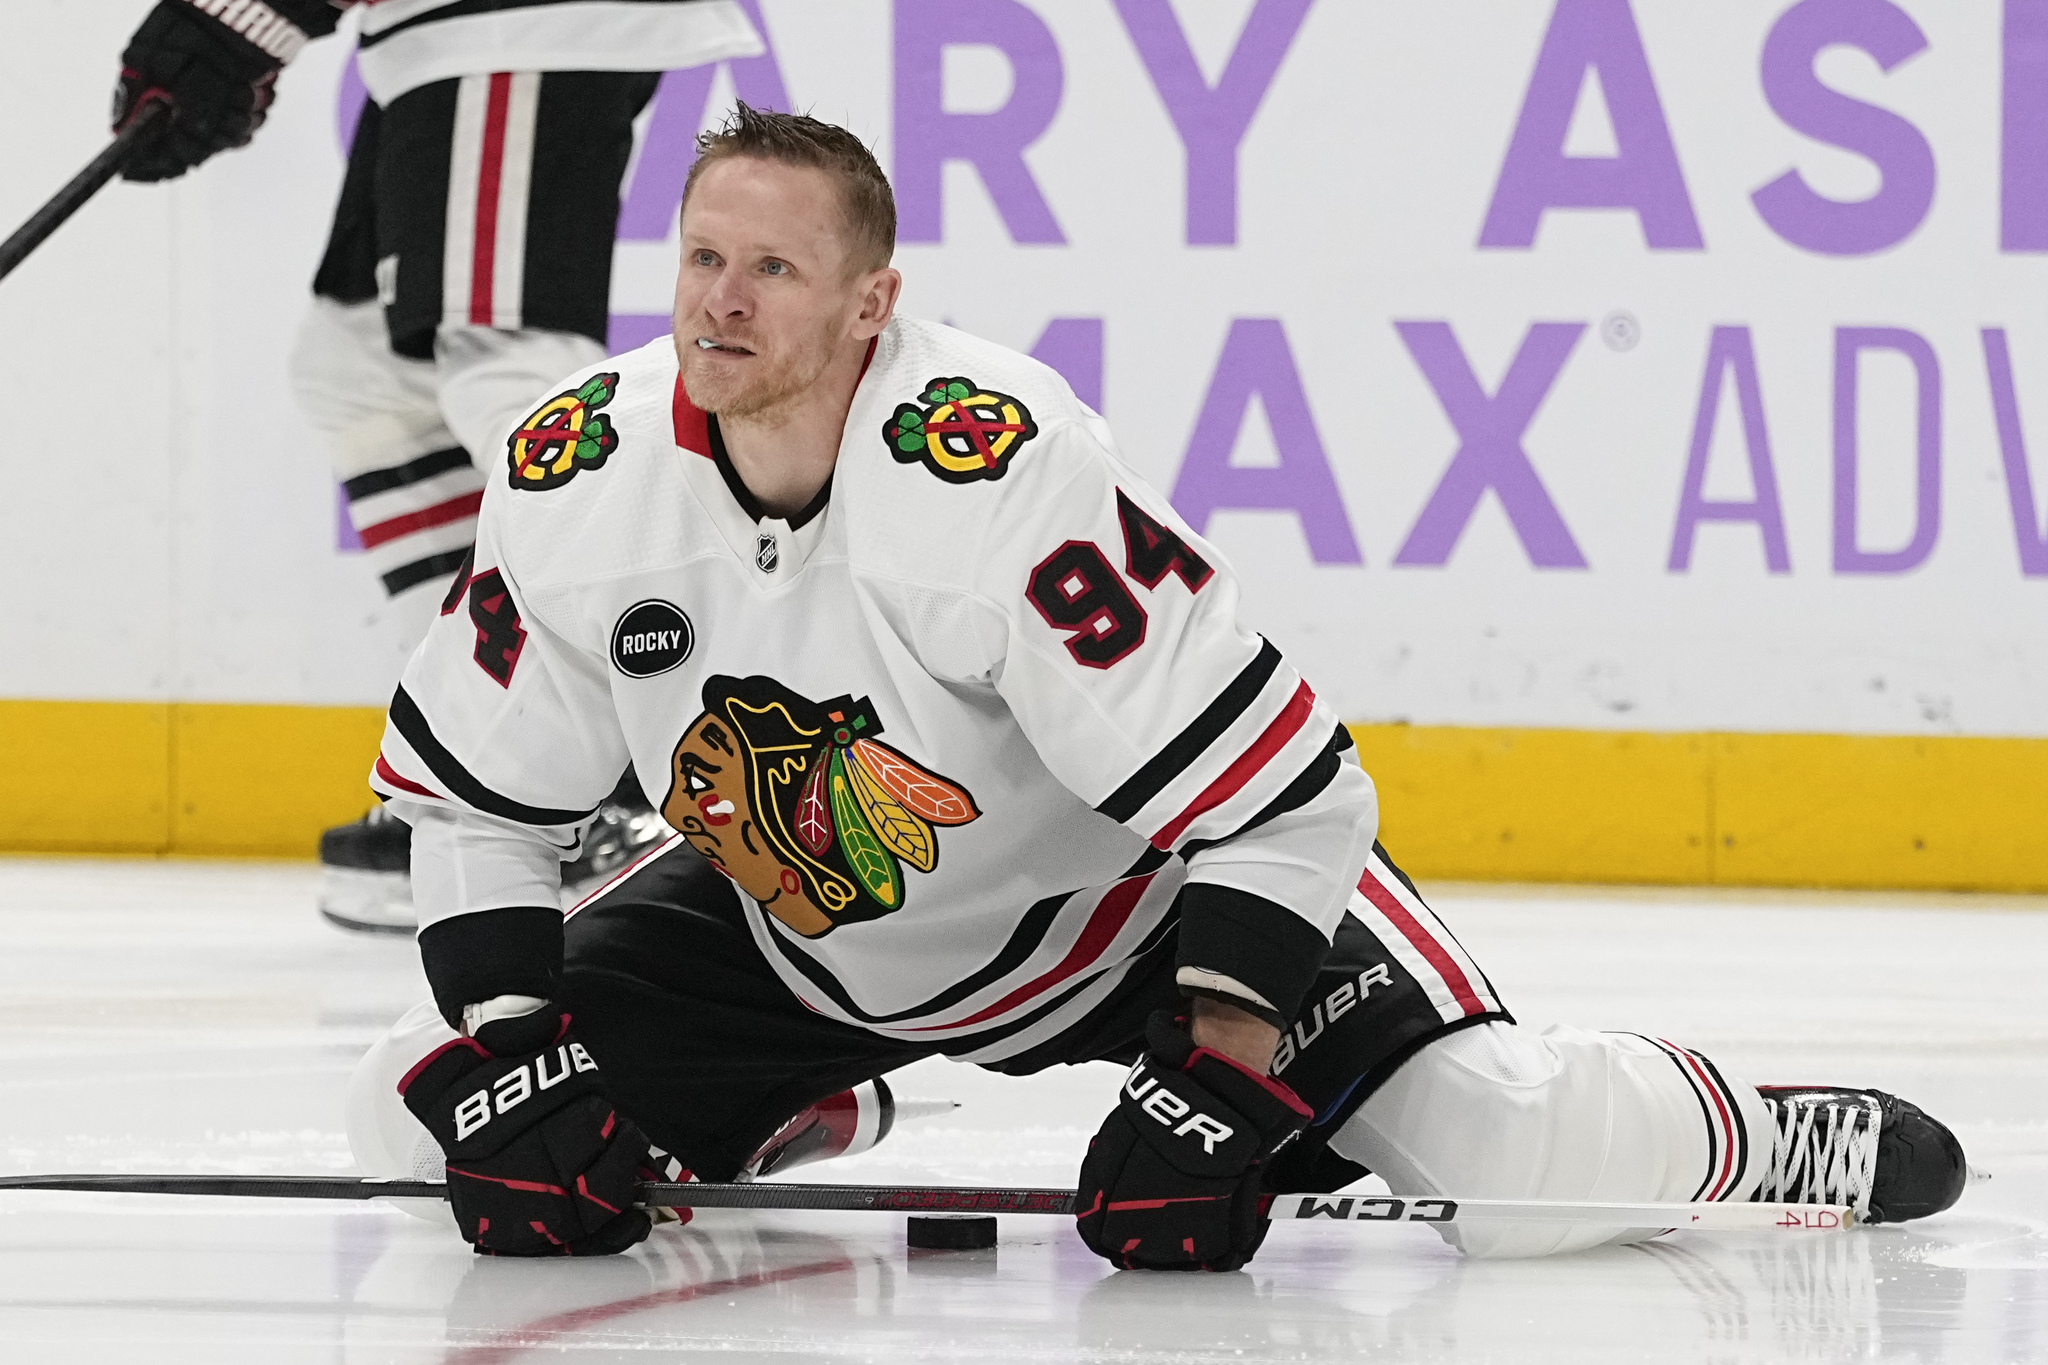 Chicago Blackhawks right wing Corey Perry